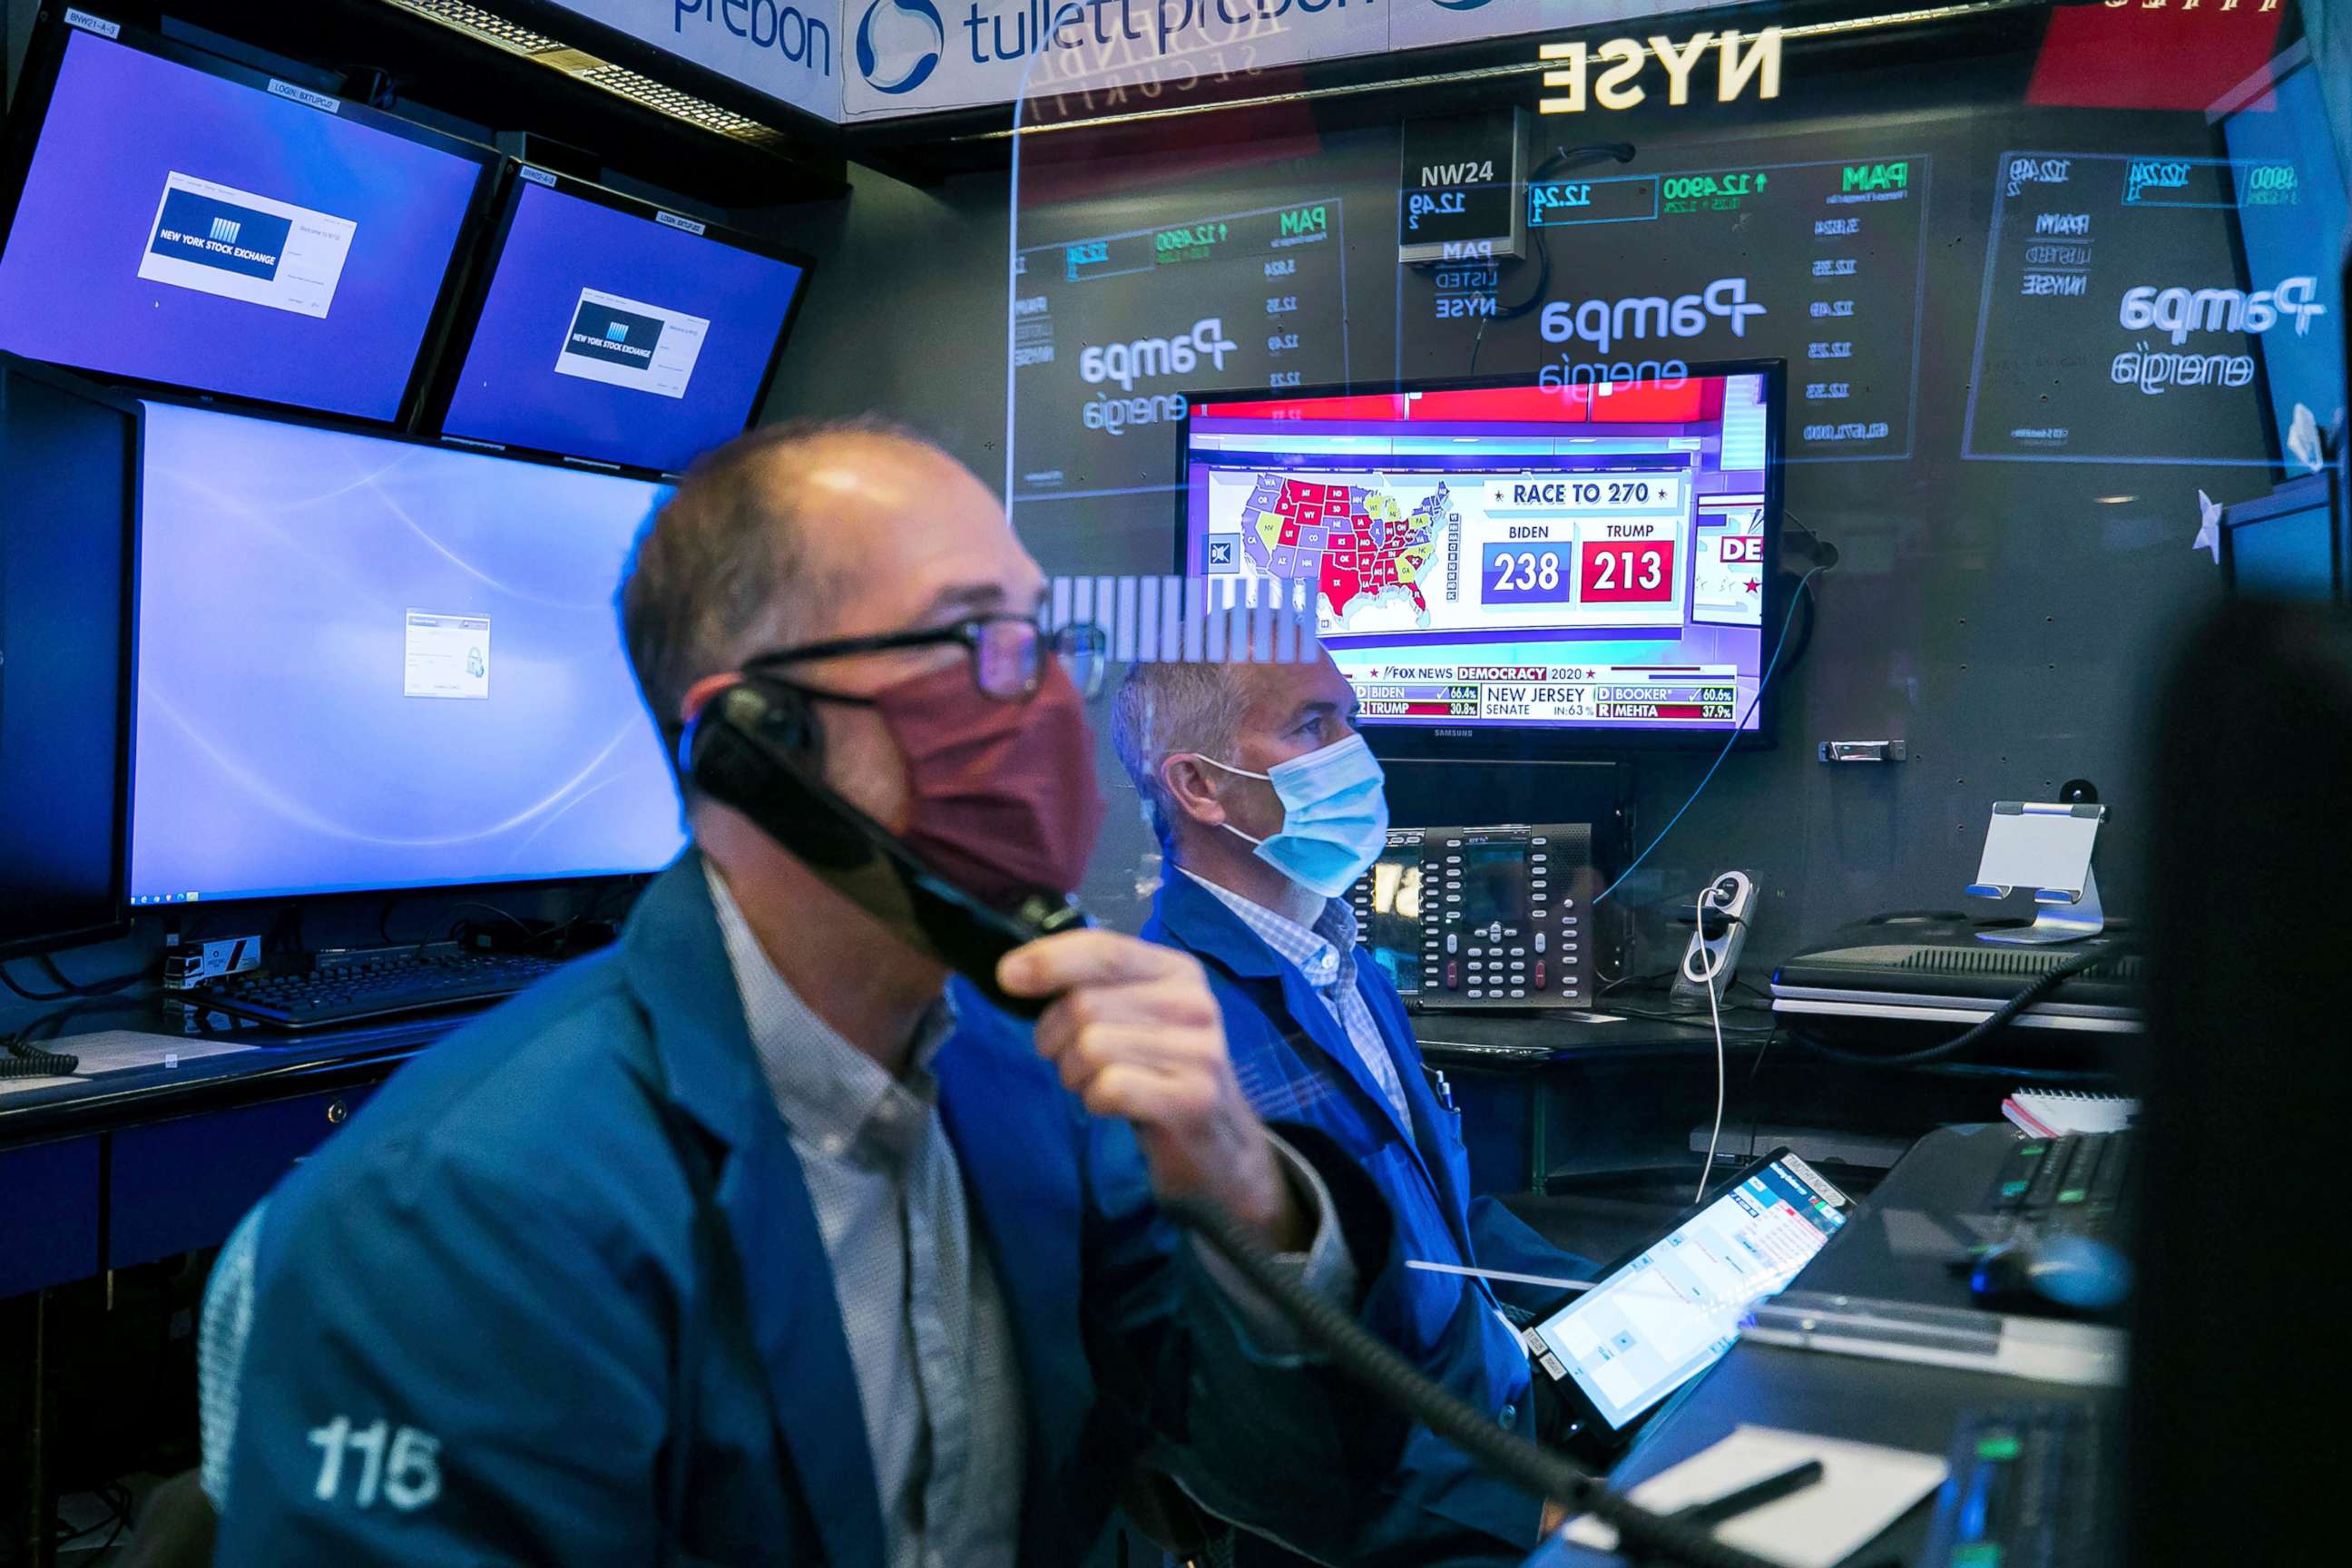 PHOTO: This photo provided by the New York Stock Exchange shows activity on the trading floor, Nov. 4, 2020.